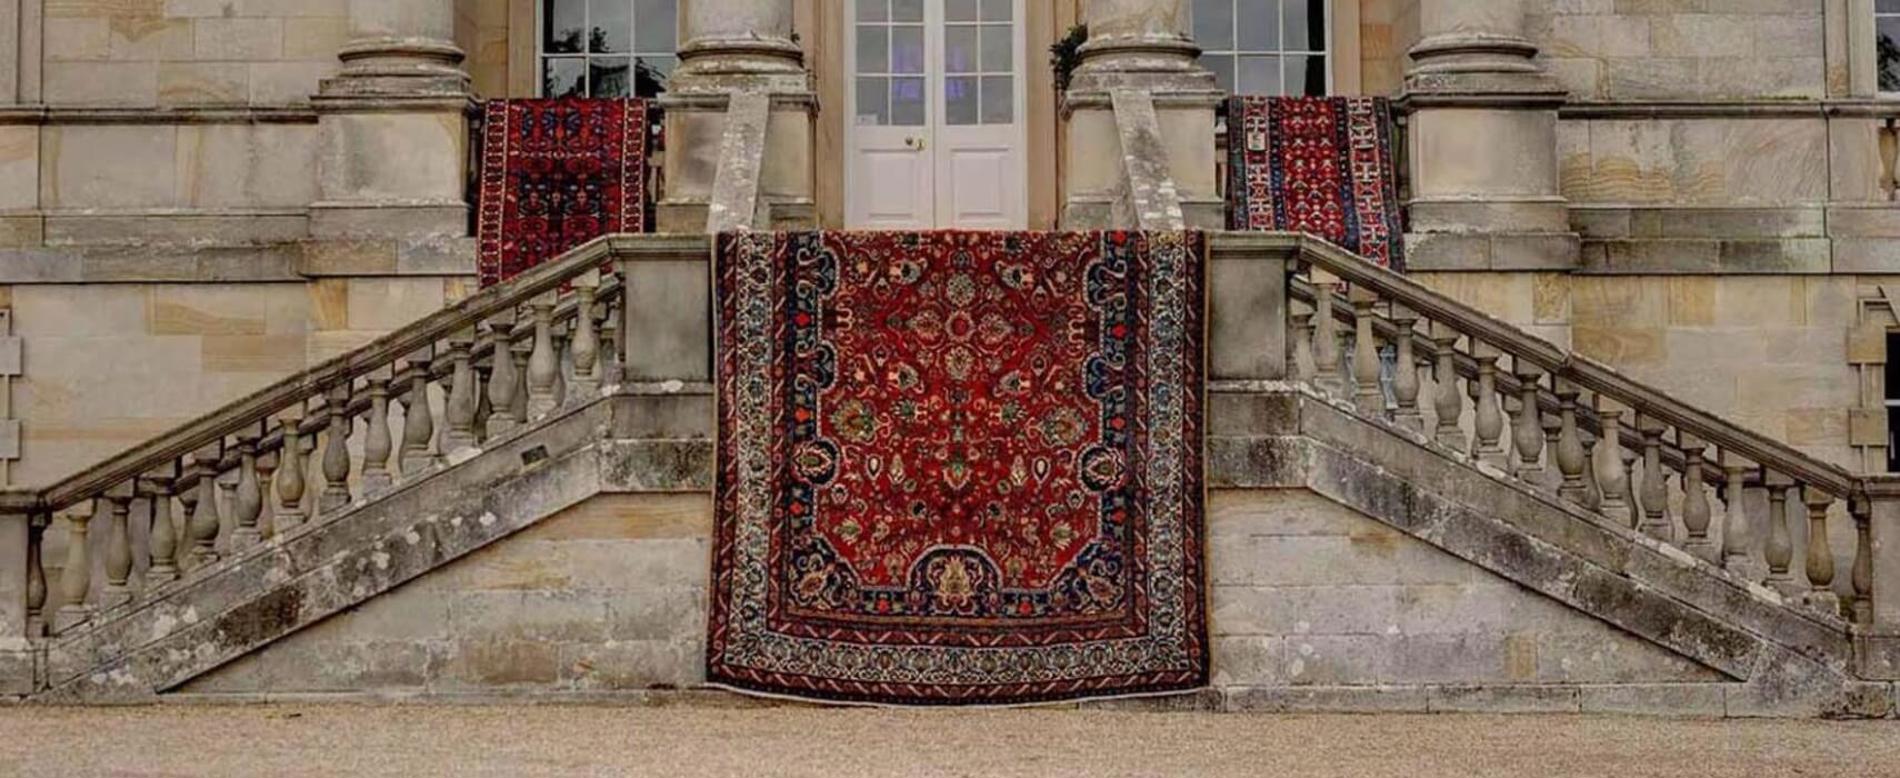 The finest handmade rugs since 1975